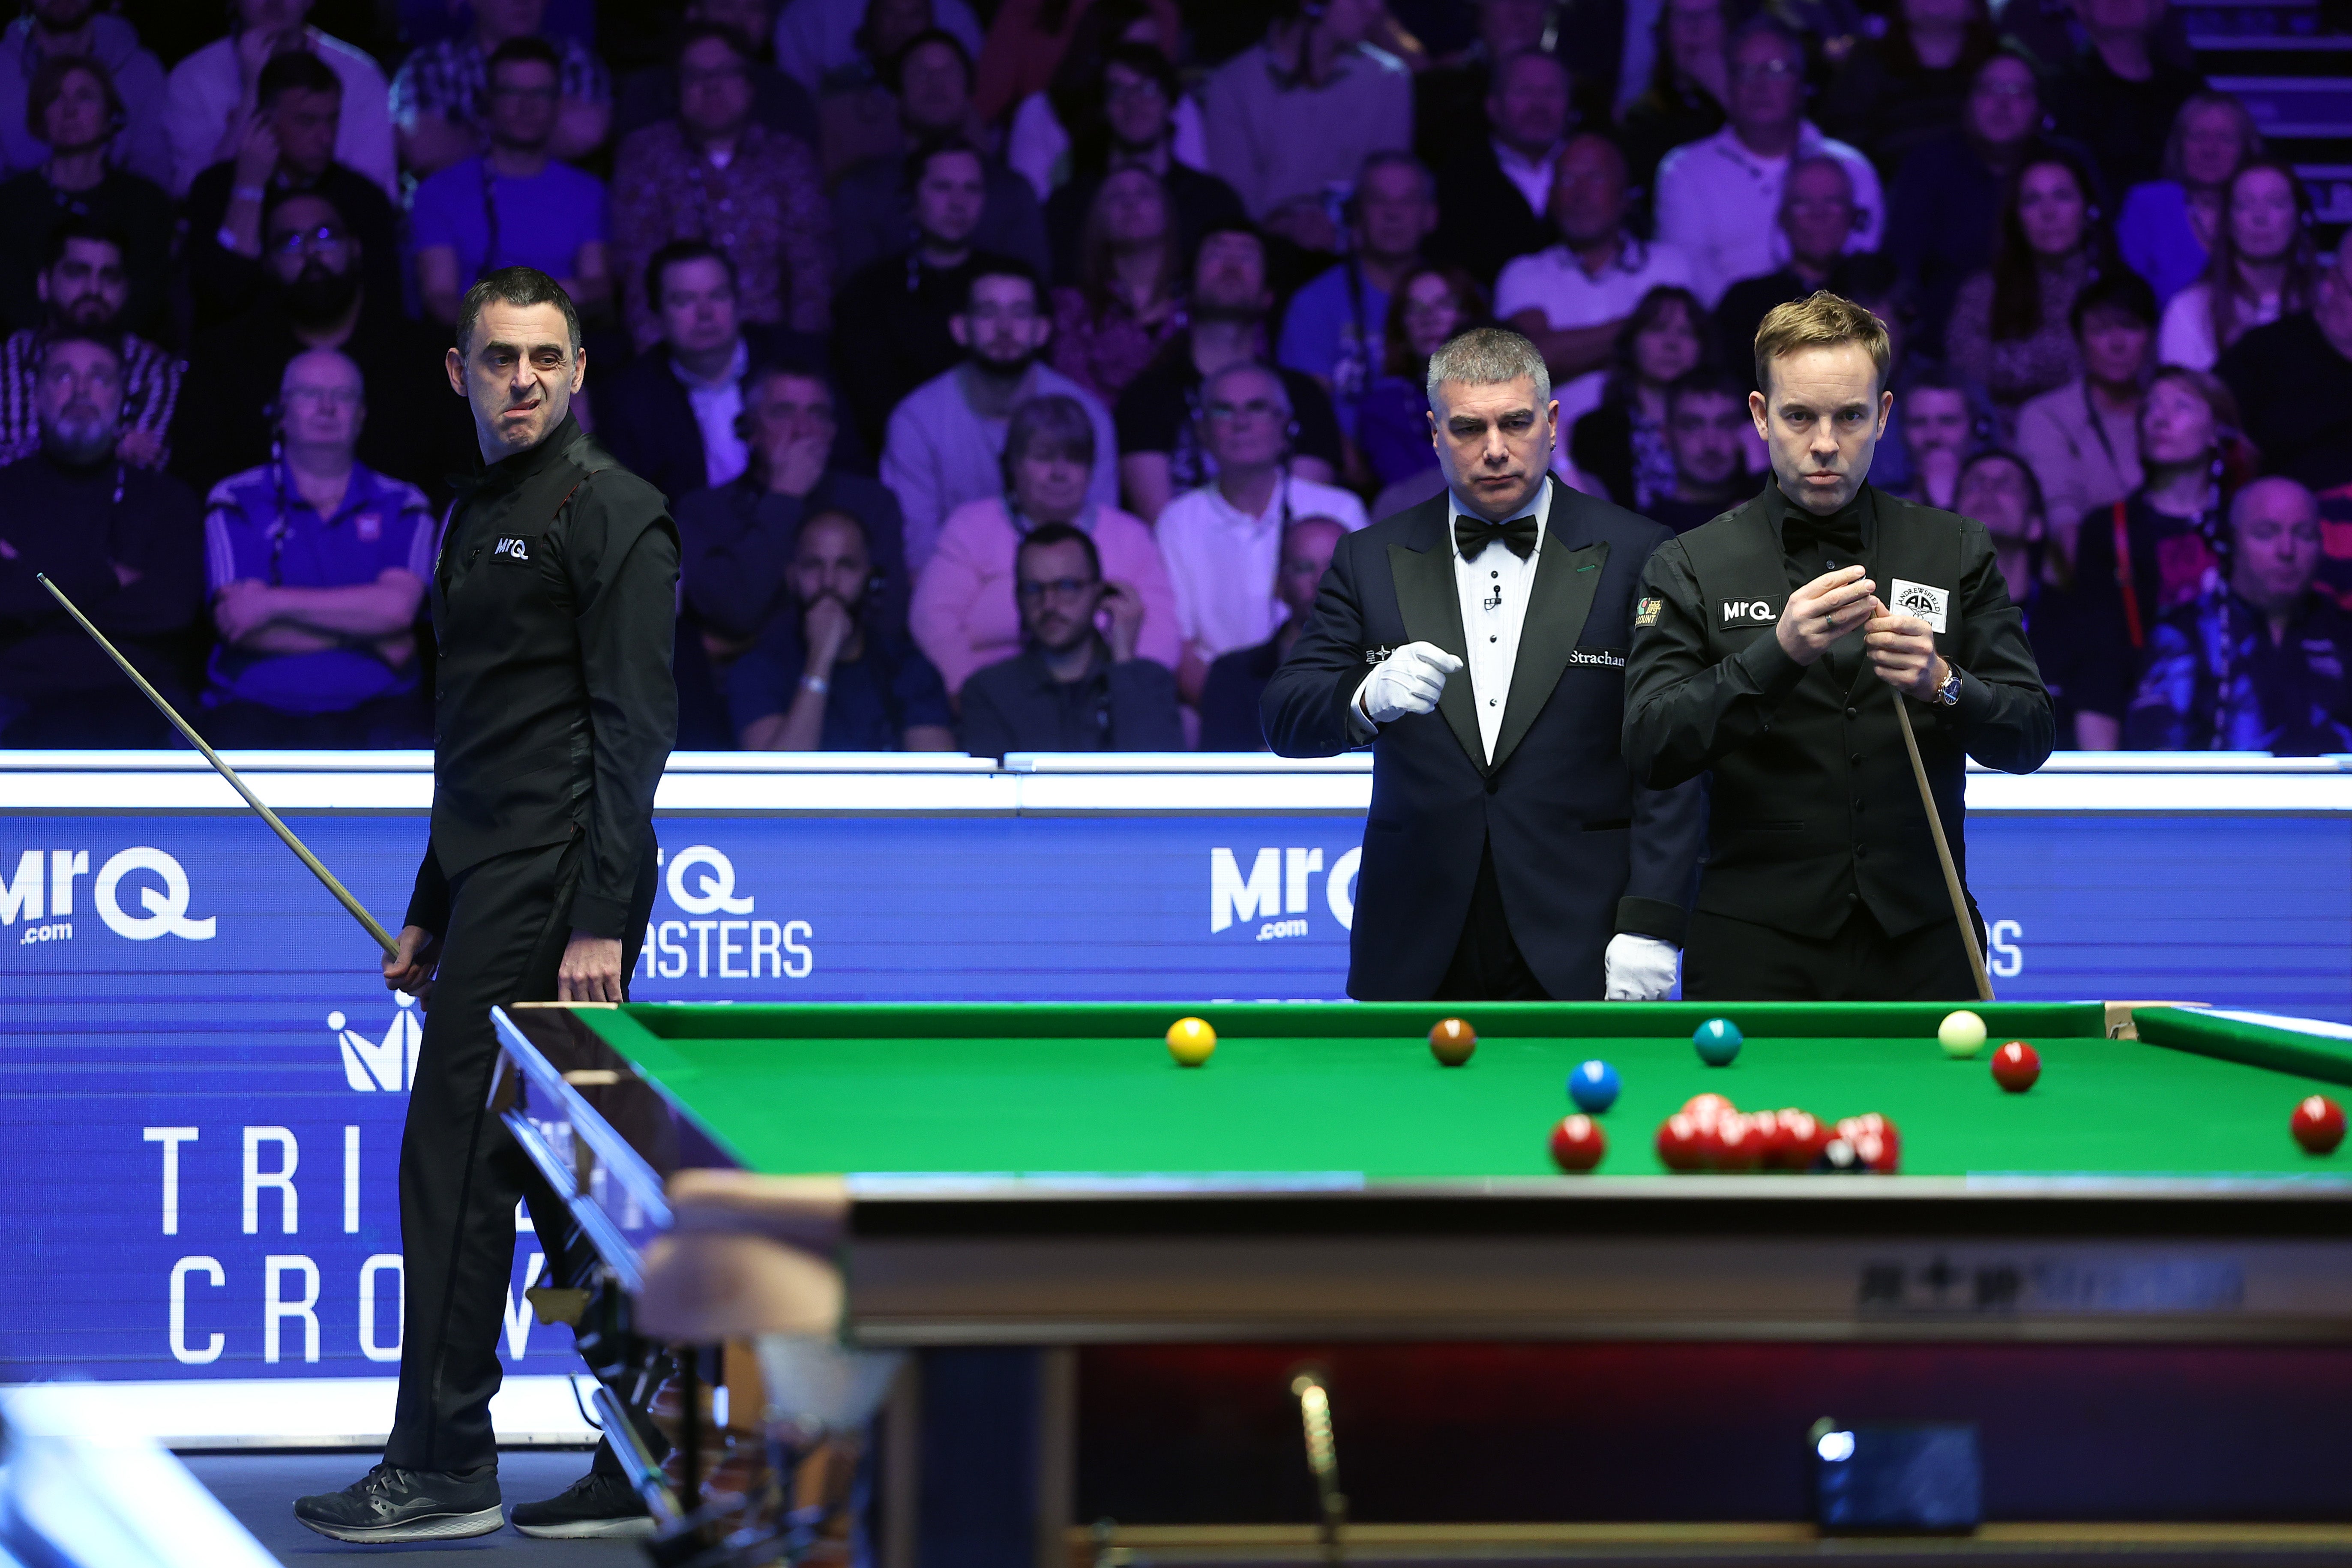 Ronnie O’Sullivan and Ali Carter have reignited their long-standing feud